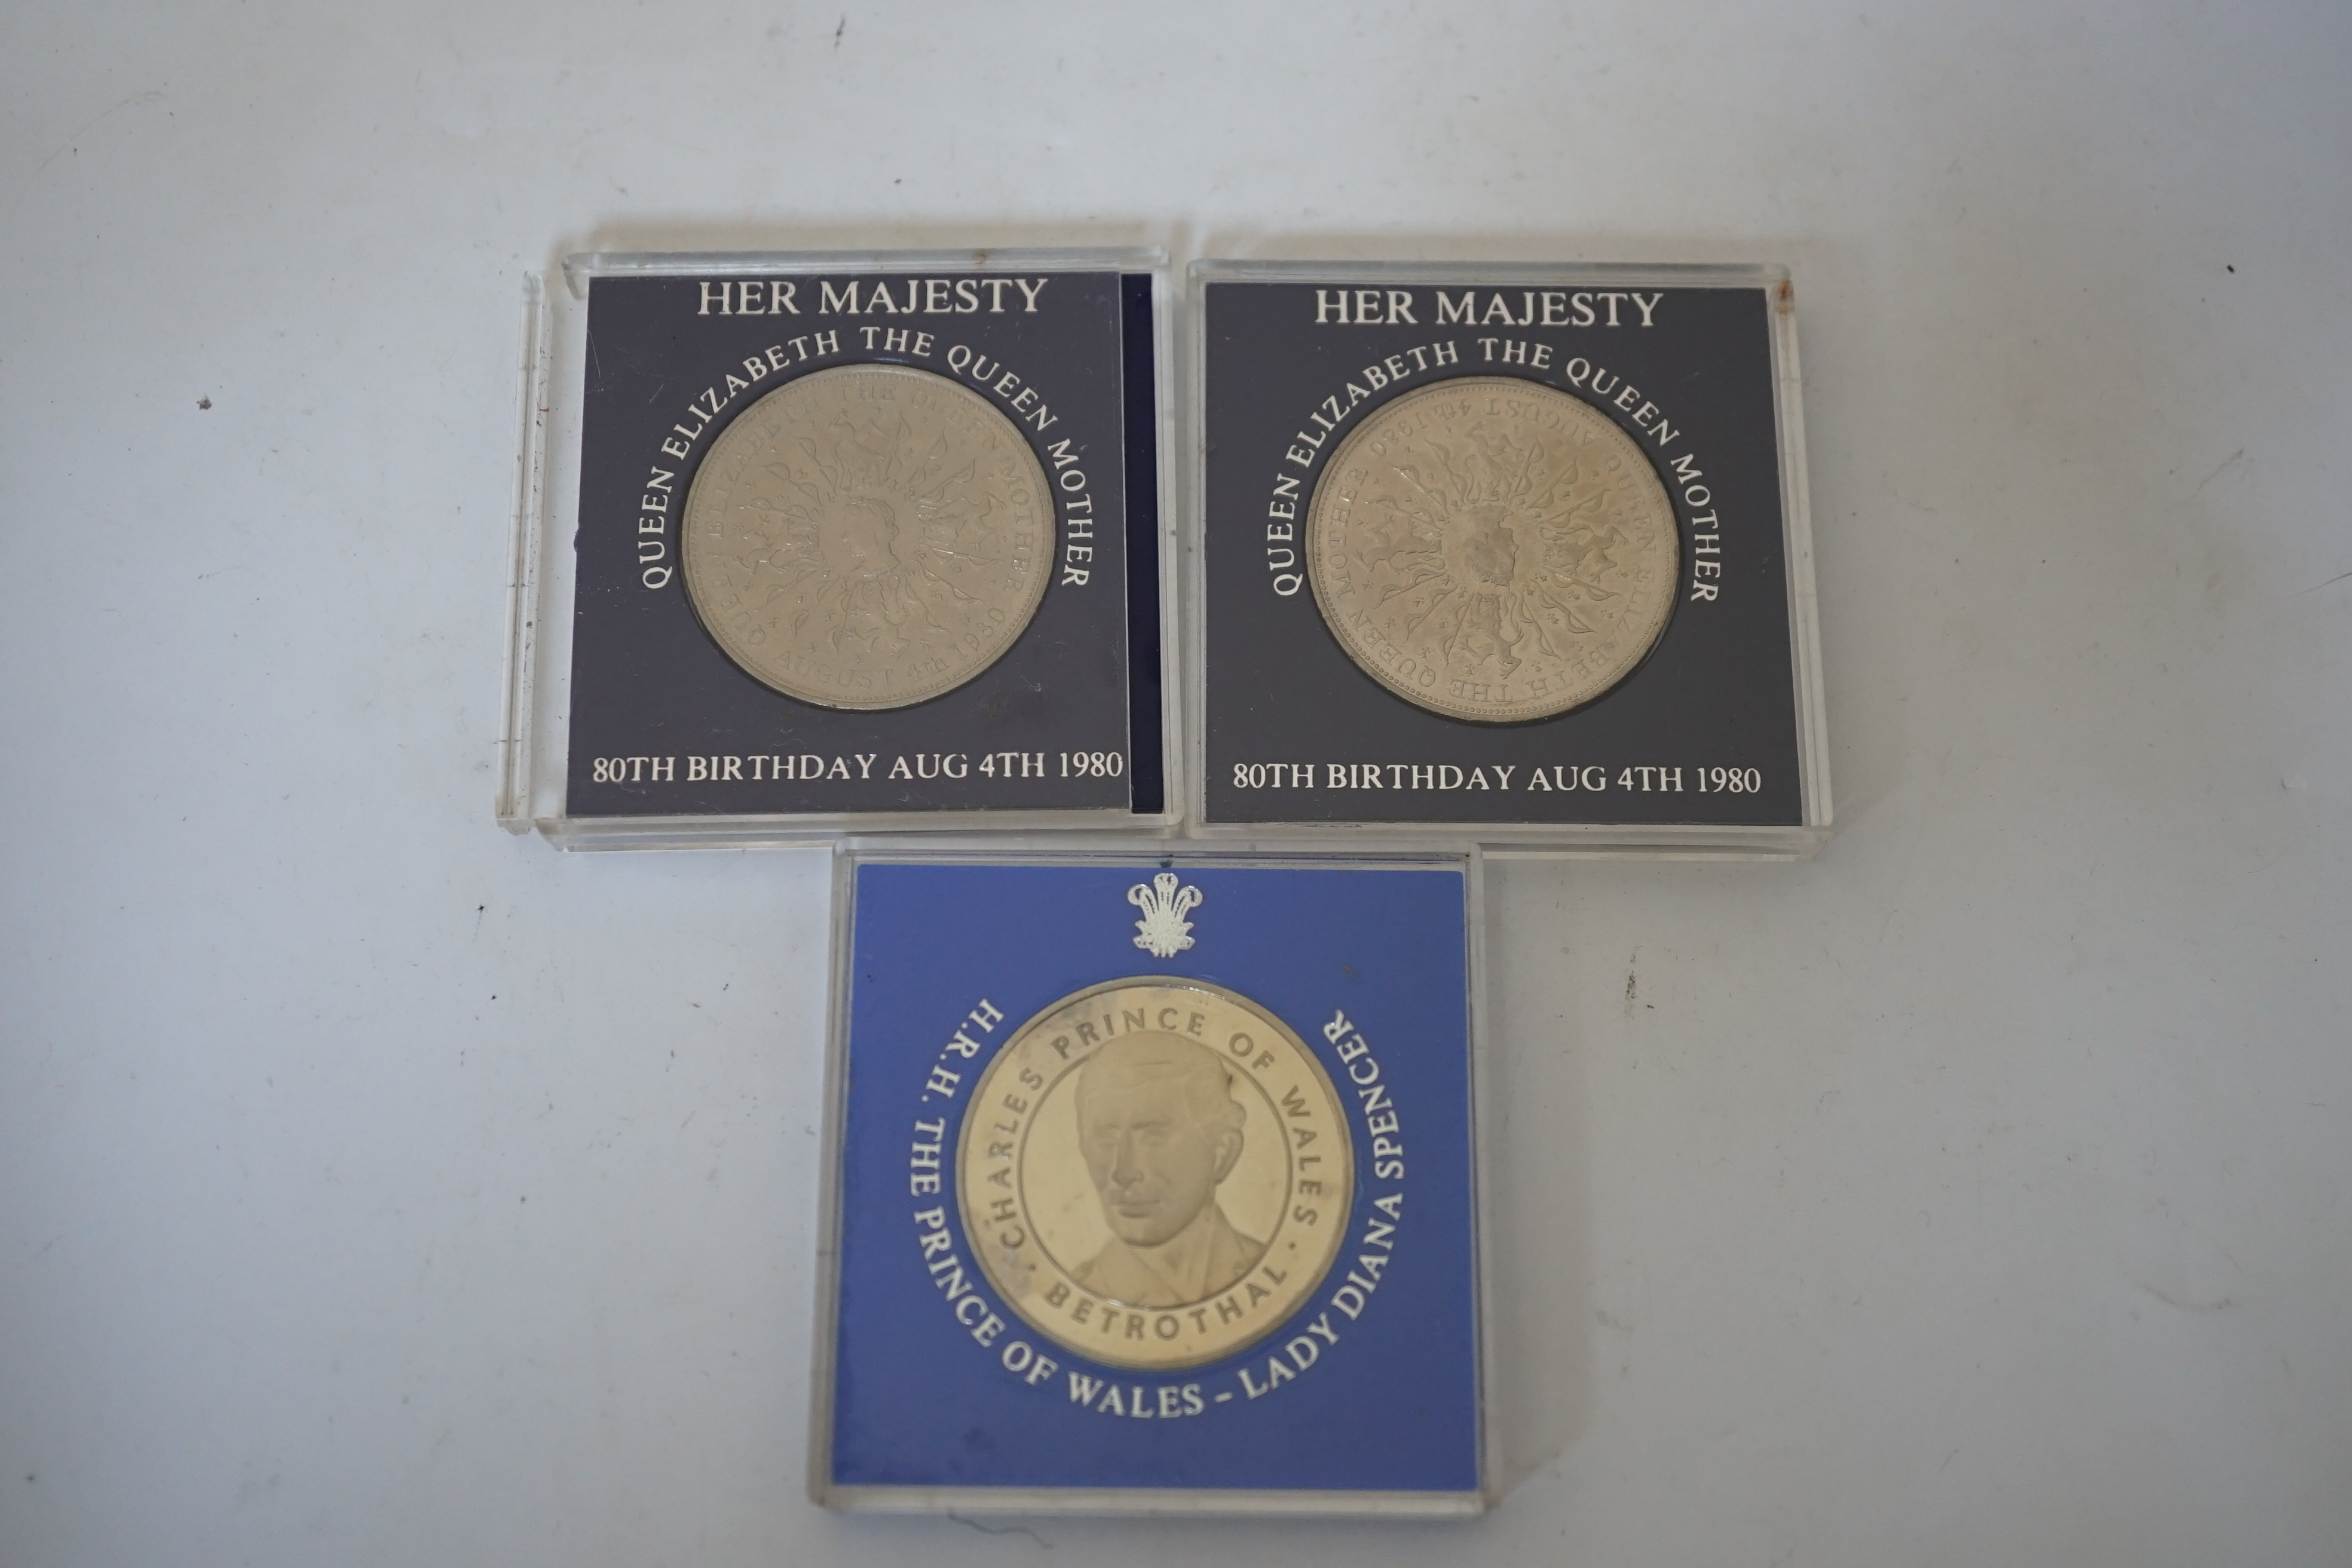 British and World commemorative coins and medals, issued by Birmingham, Pobjoy and Franklin mints, including Charles and Lady Diana silver medals, two Republic of Malta decimal proof sets for 1980, Queen Mother sterling